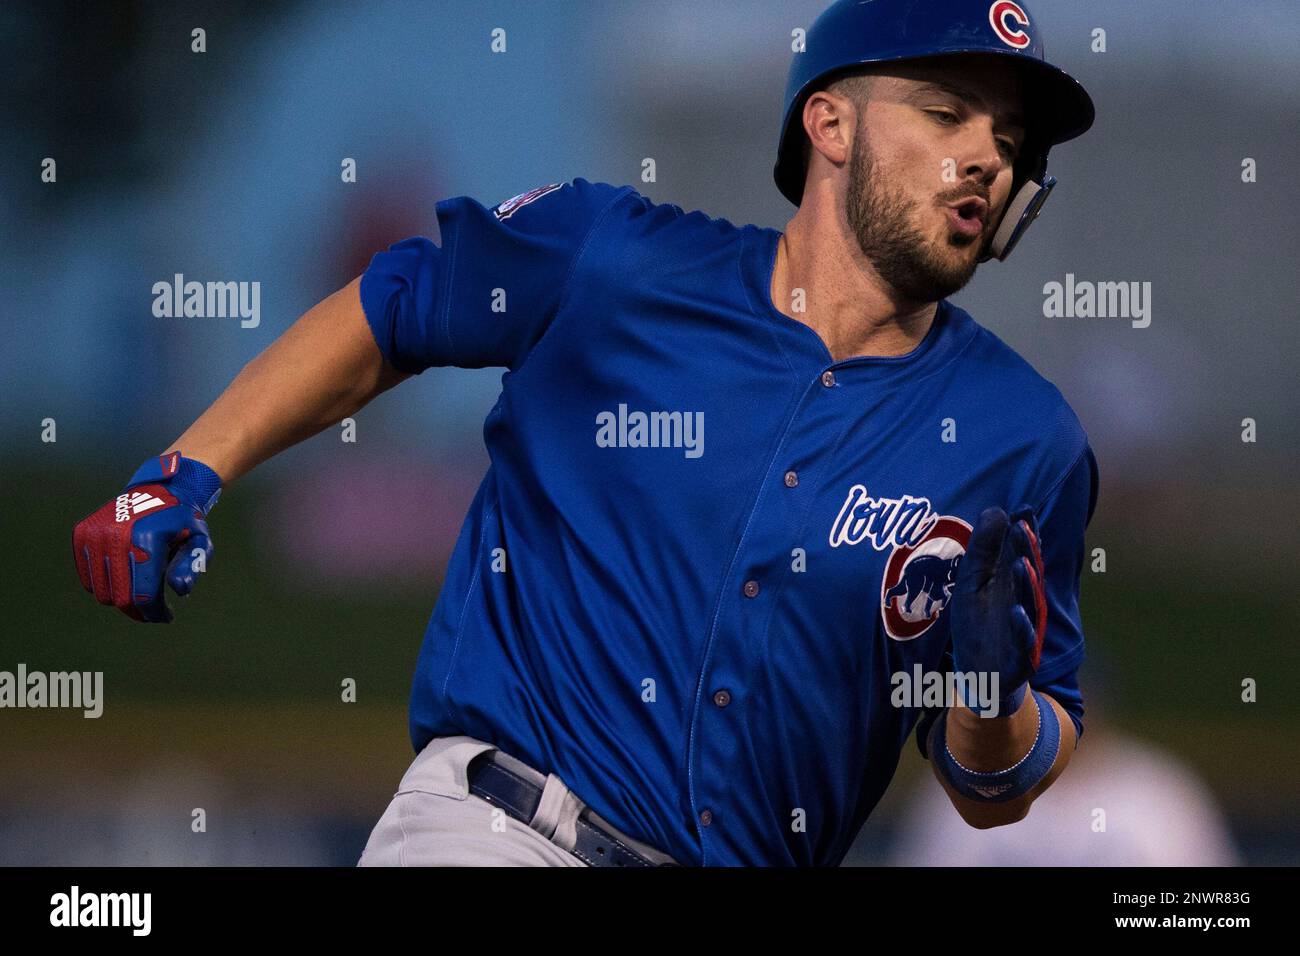 National League All-Star Kris Bryant of the Chicago Cubs looks on